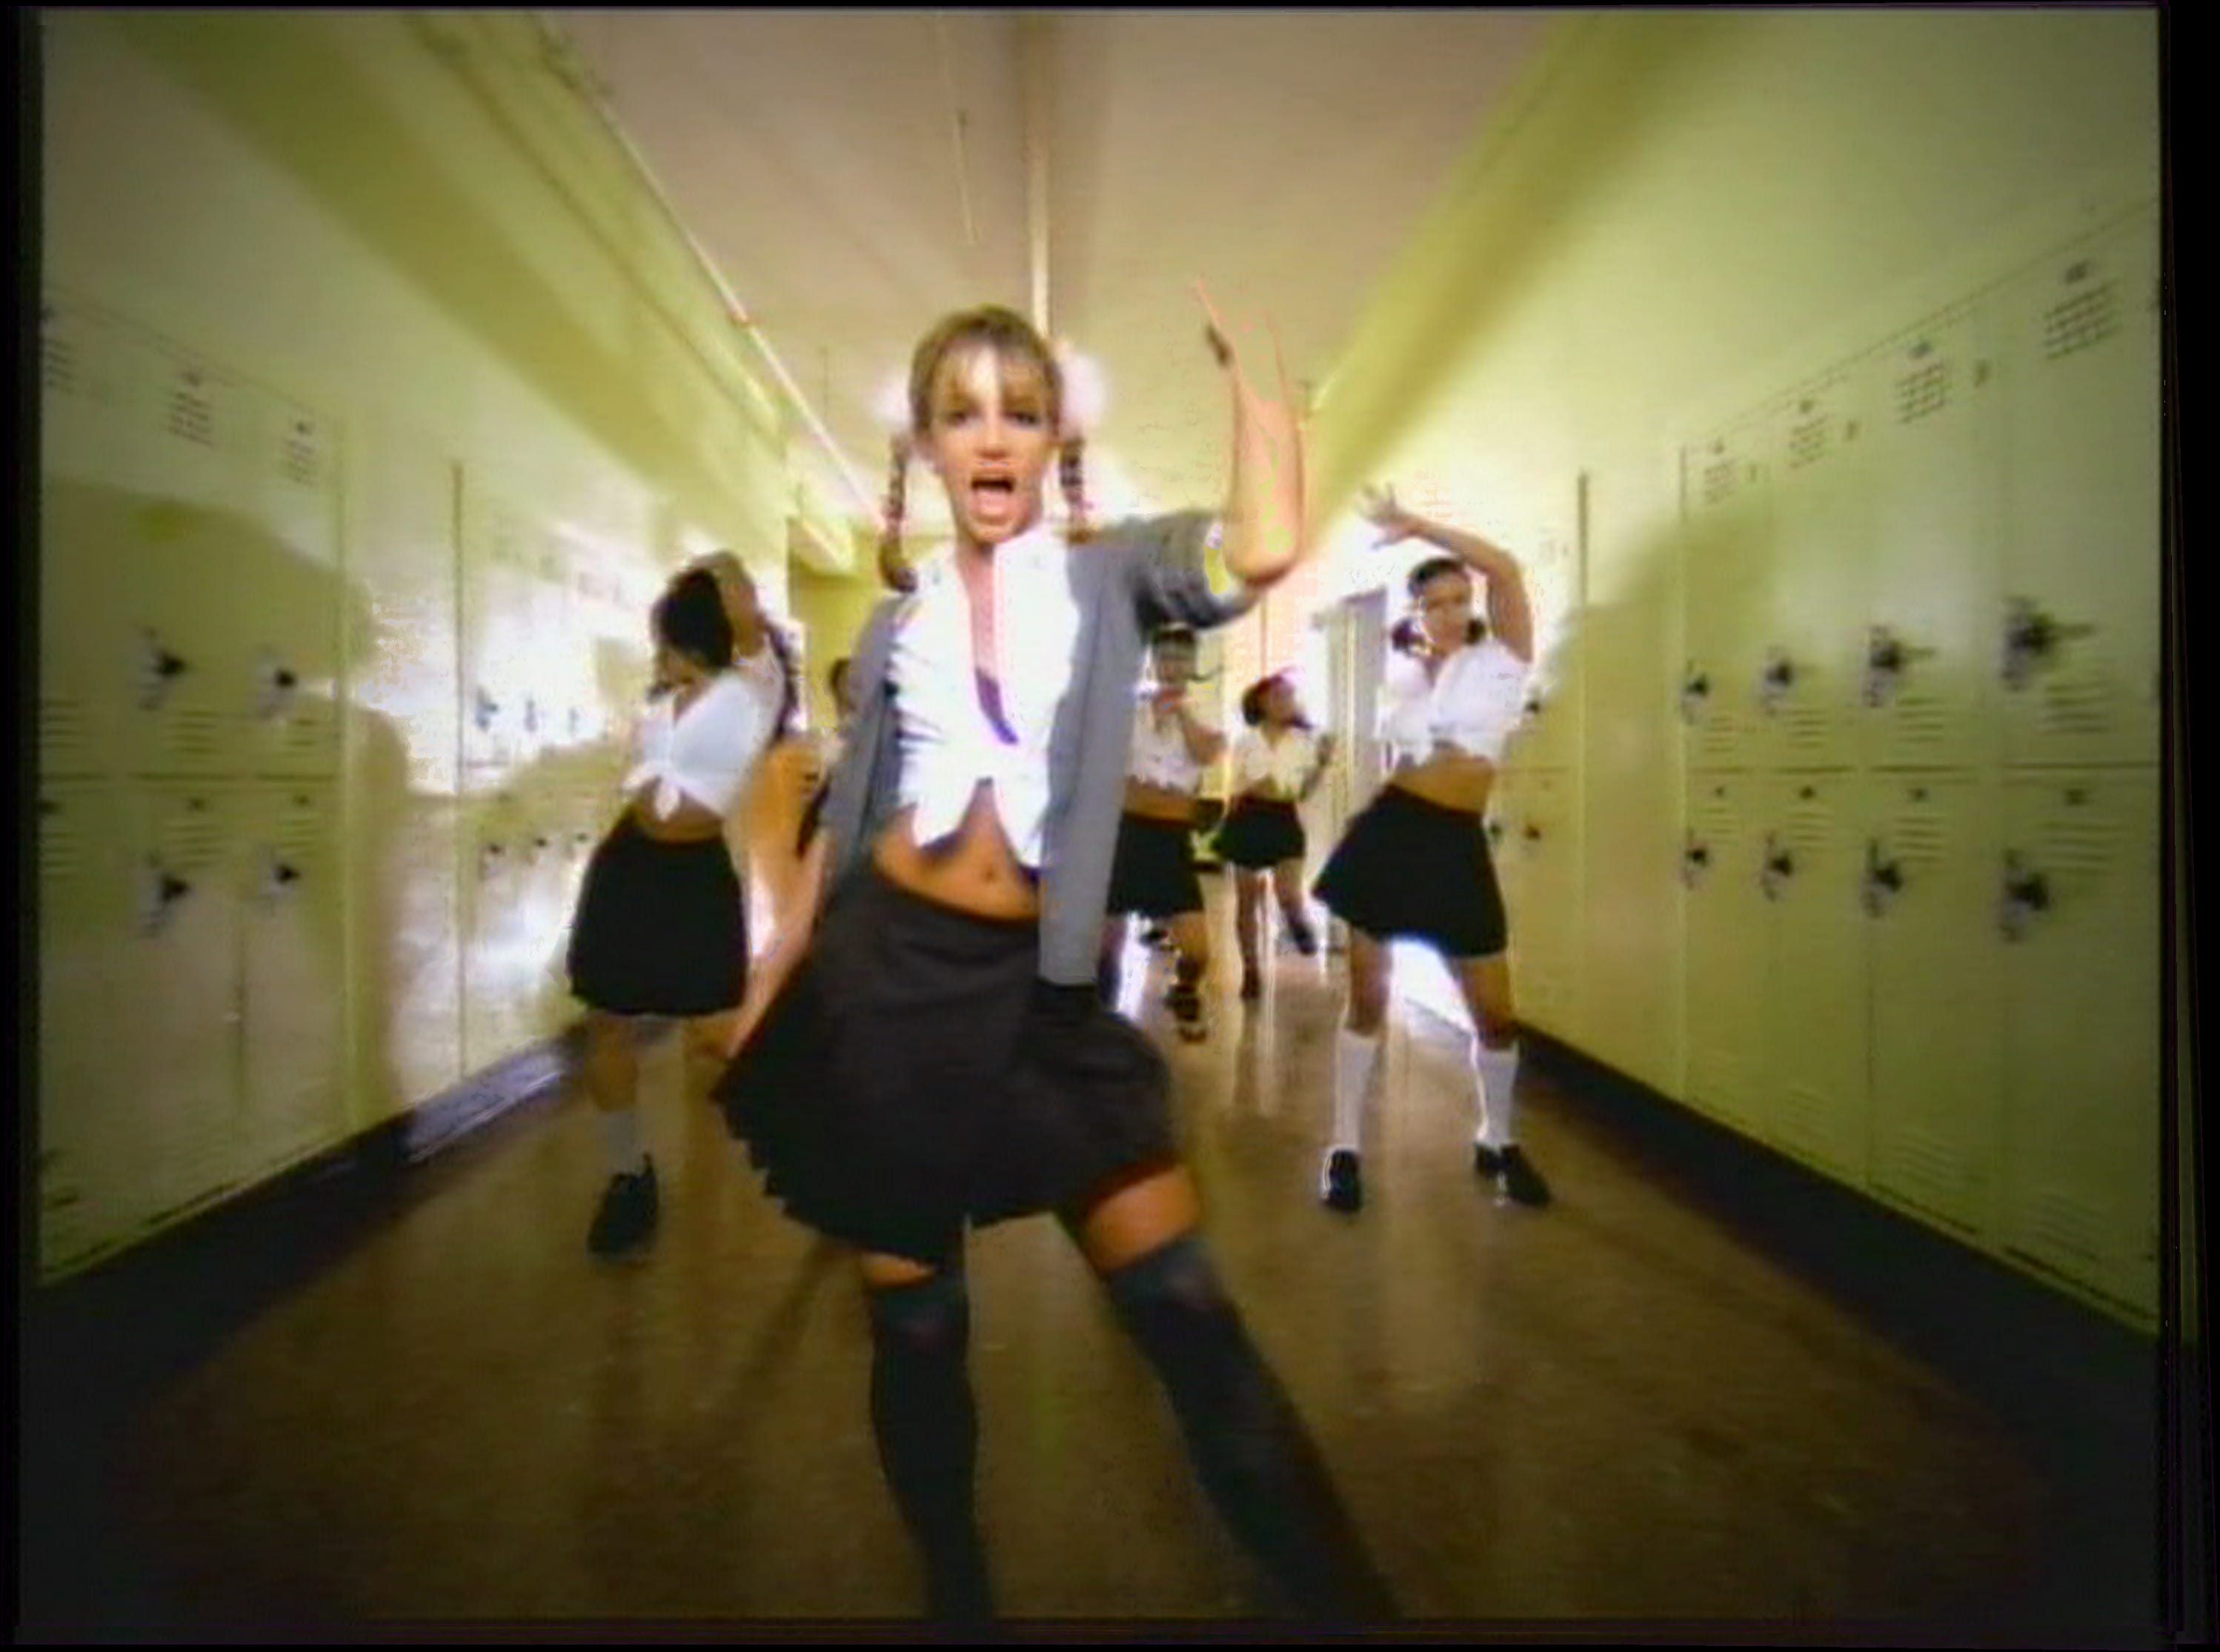 Britney Spears' hit '...Baby One More turns 20